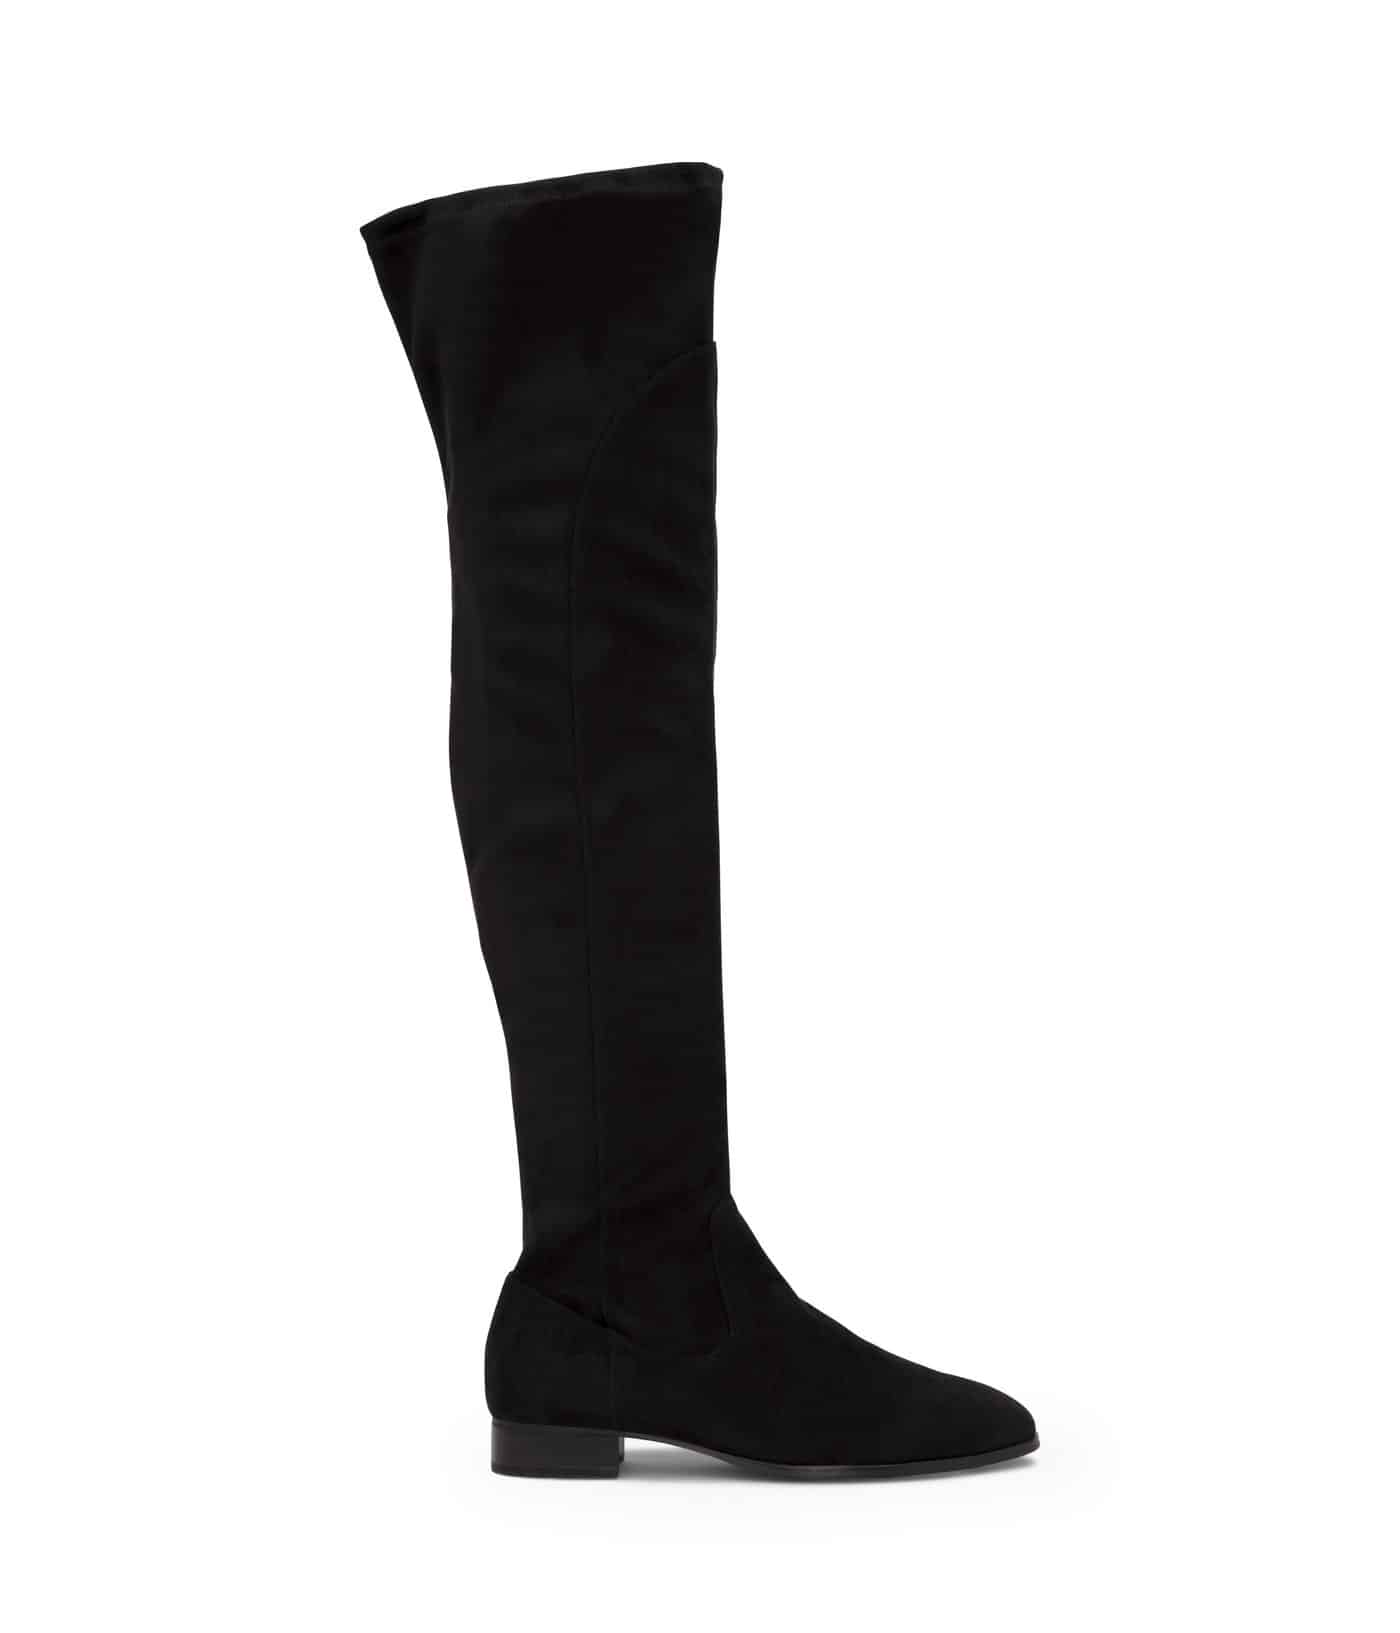 Over the knee flat black boots